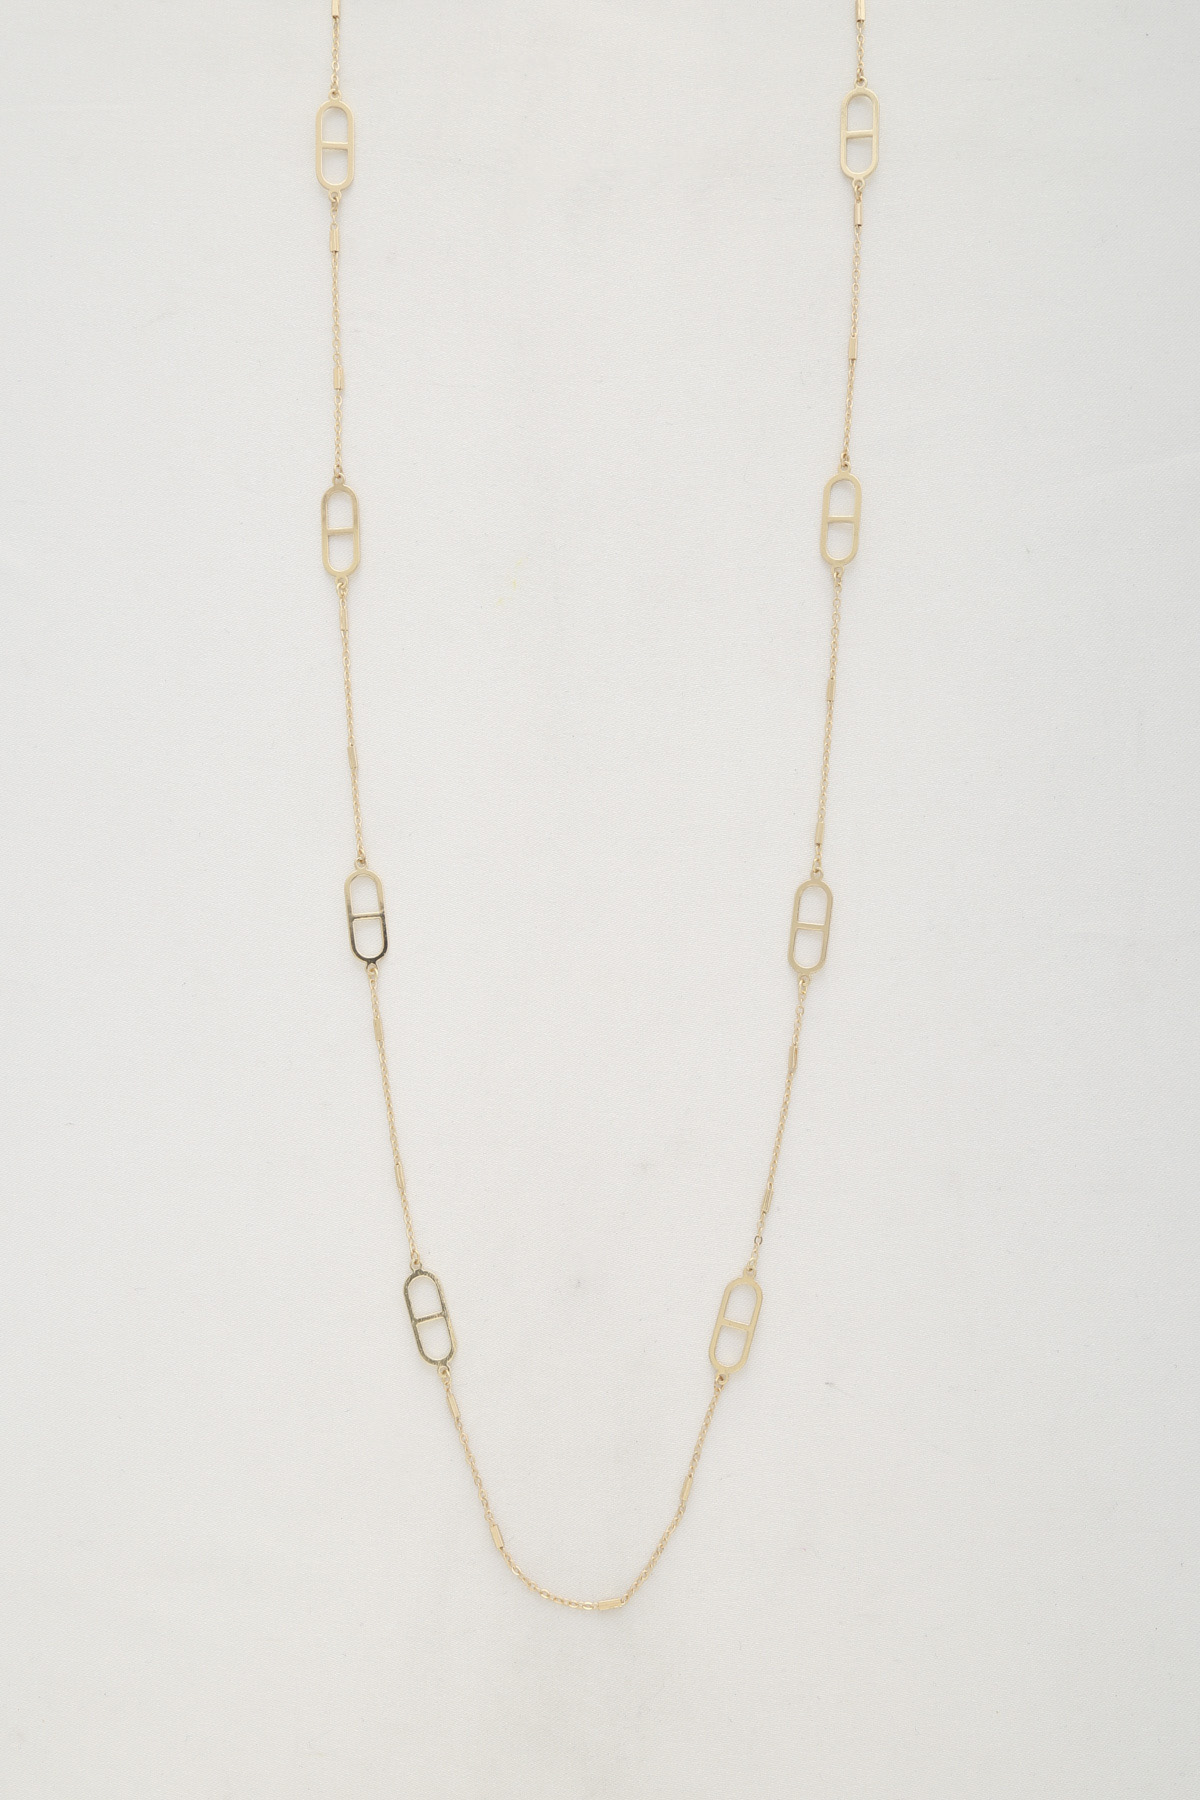 DAINTY METAL NECKLACE